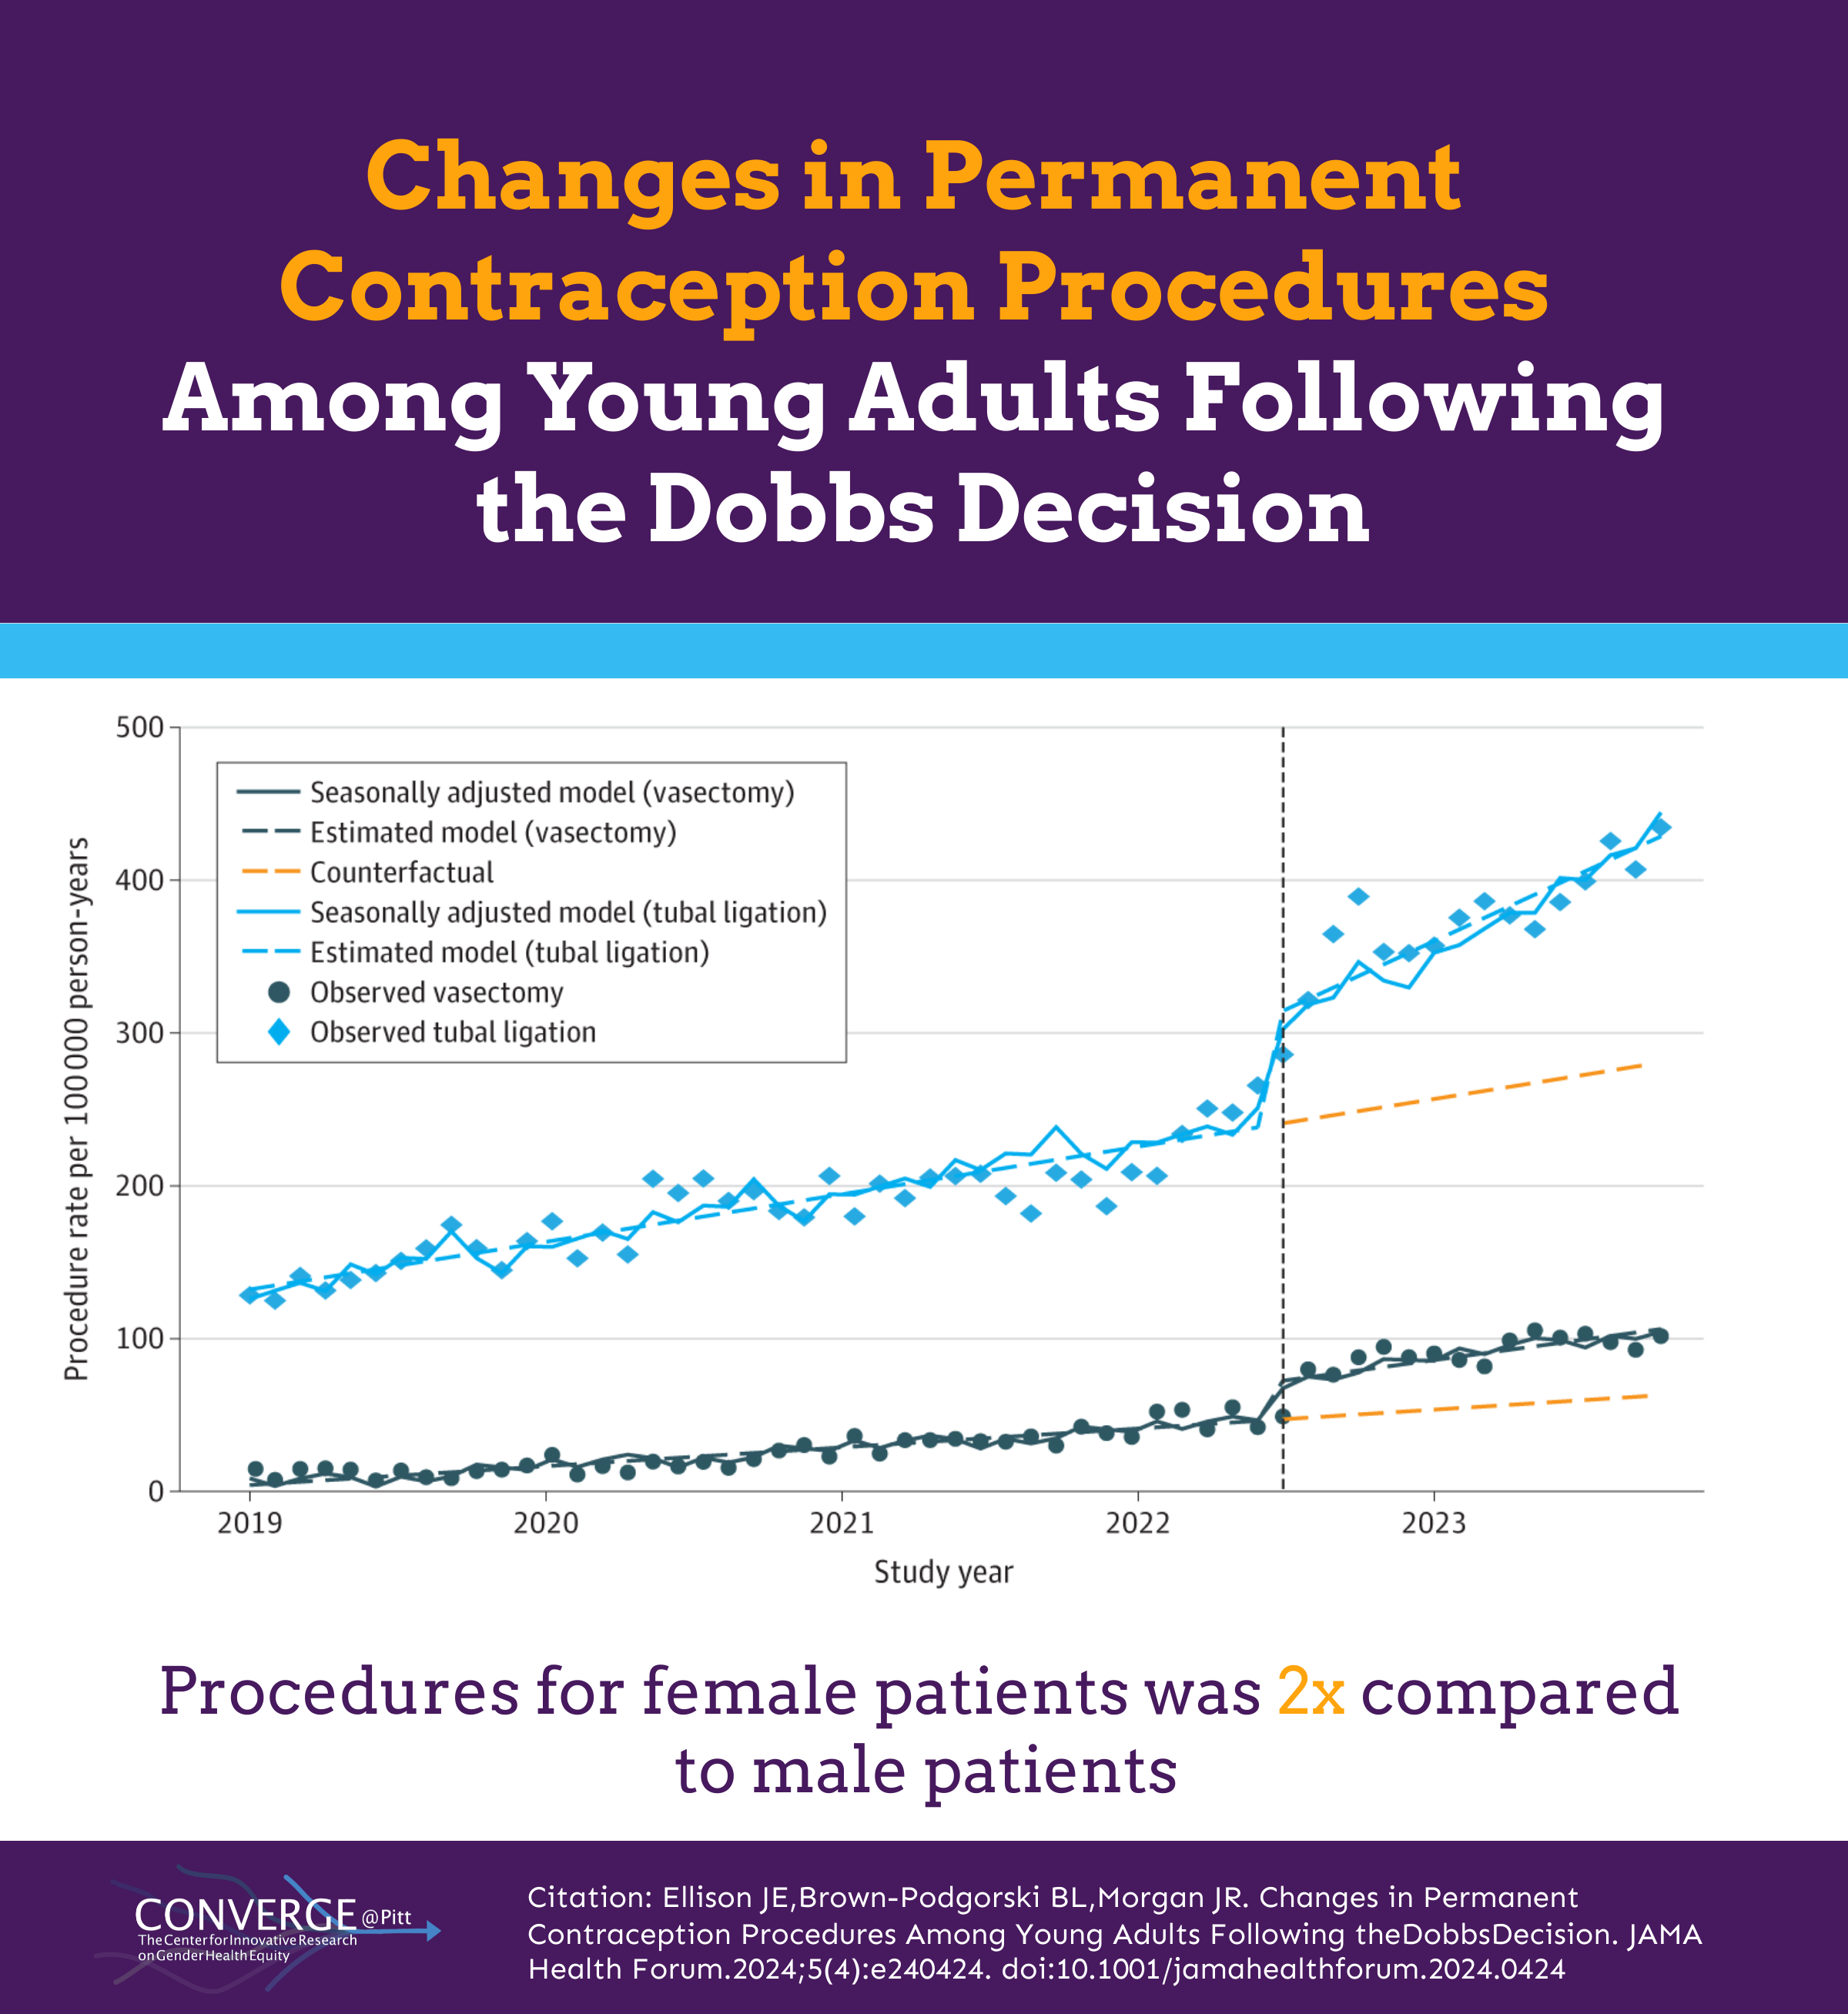 Changes in Permanent Contraception Procedures Among Young Adults Following the Dobbs Decision